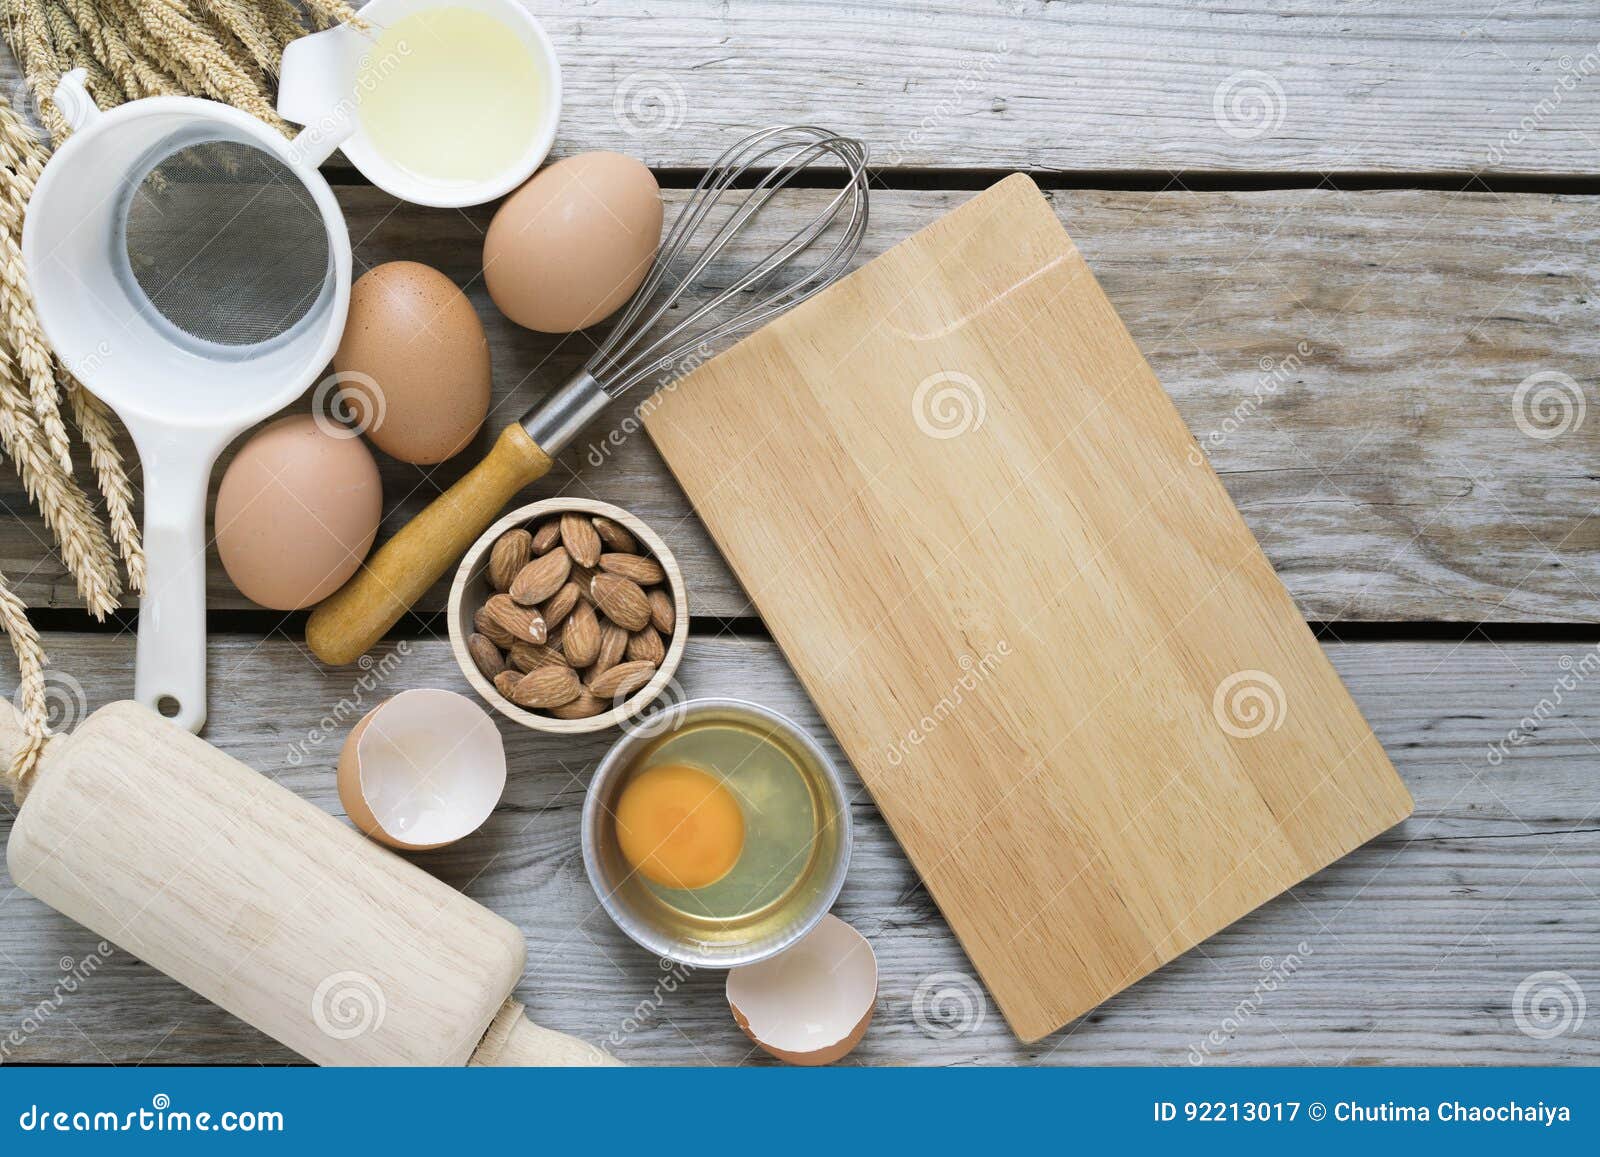 Food Ingredients , Kitchen Utensils For Cooking Stock Image - Image of ...